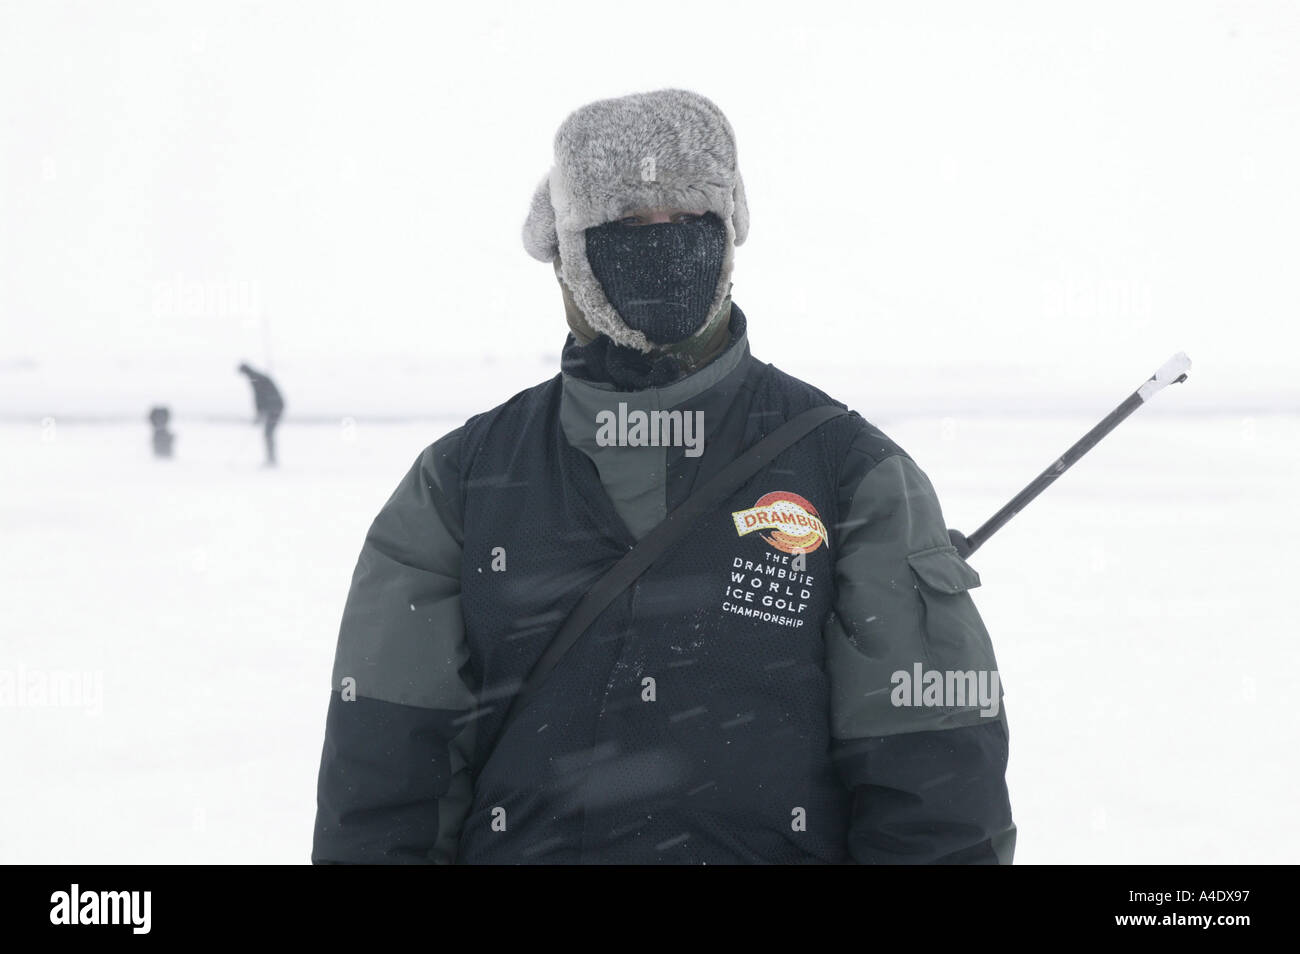 Polar bear spotter with rifle at the 2004 Drambuie ice golf championship in Svalbard, Norway. Stock Photo